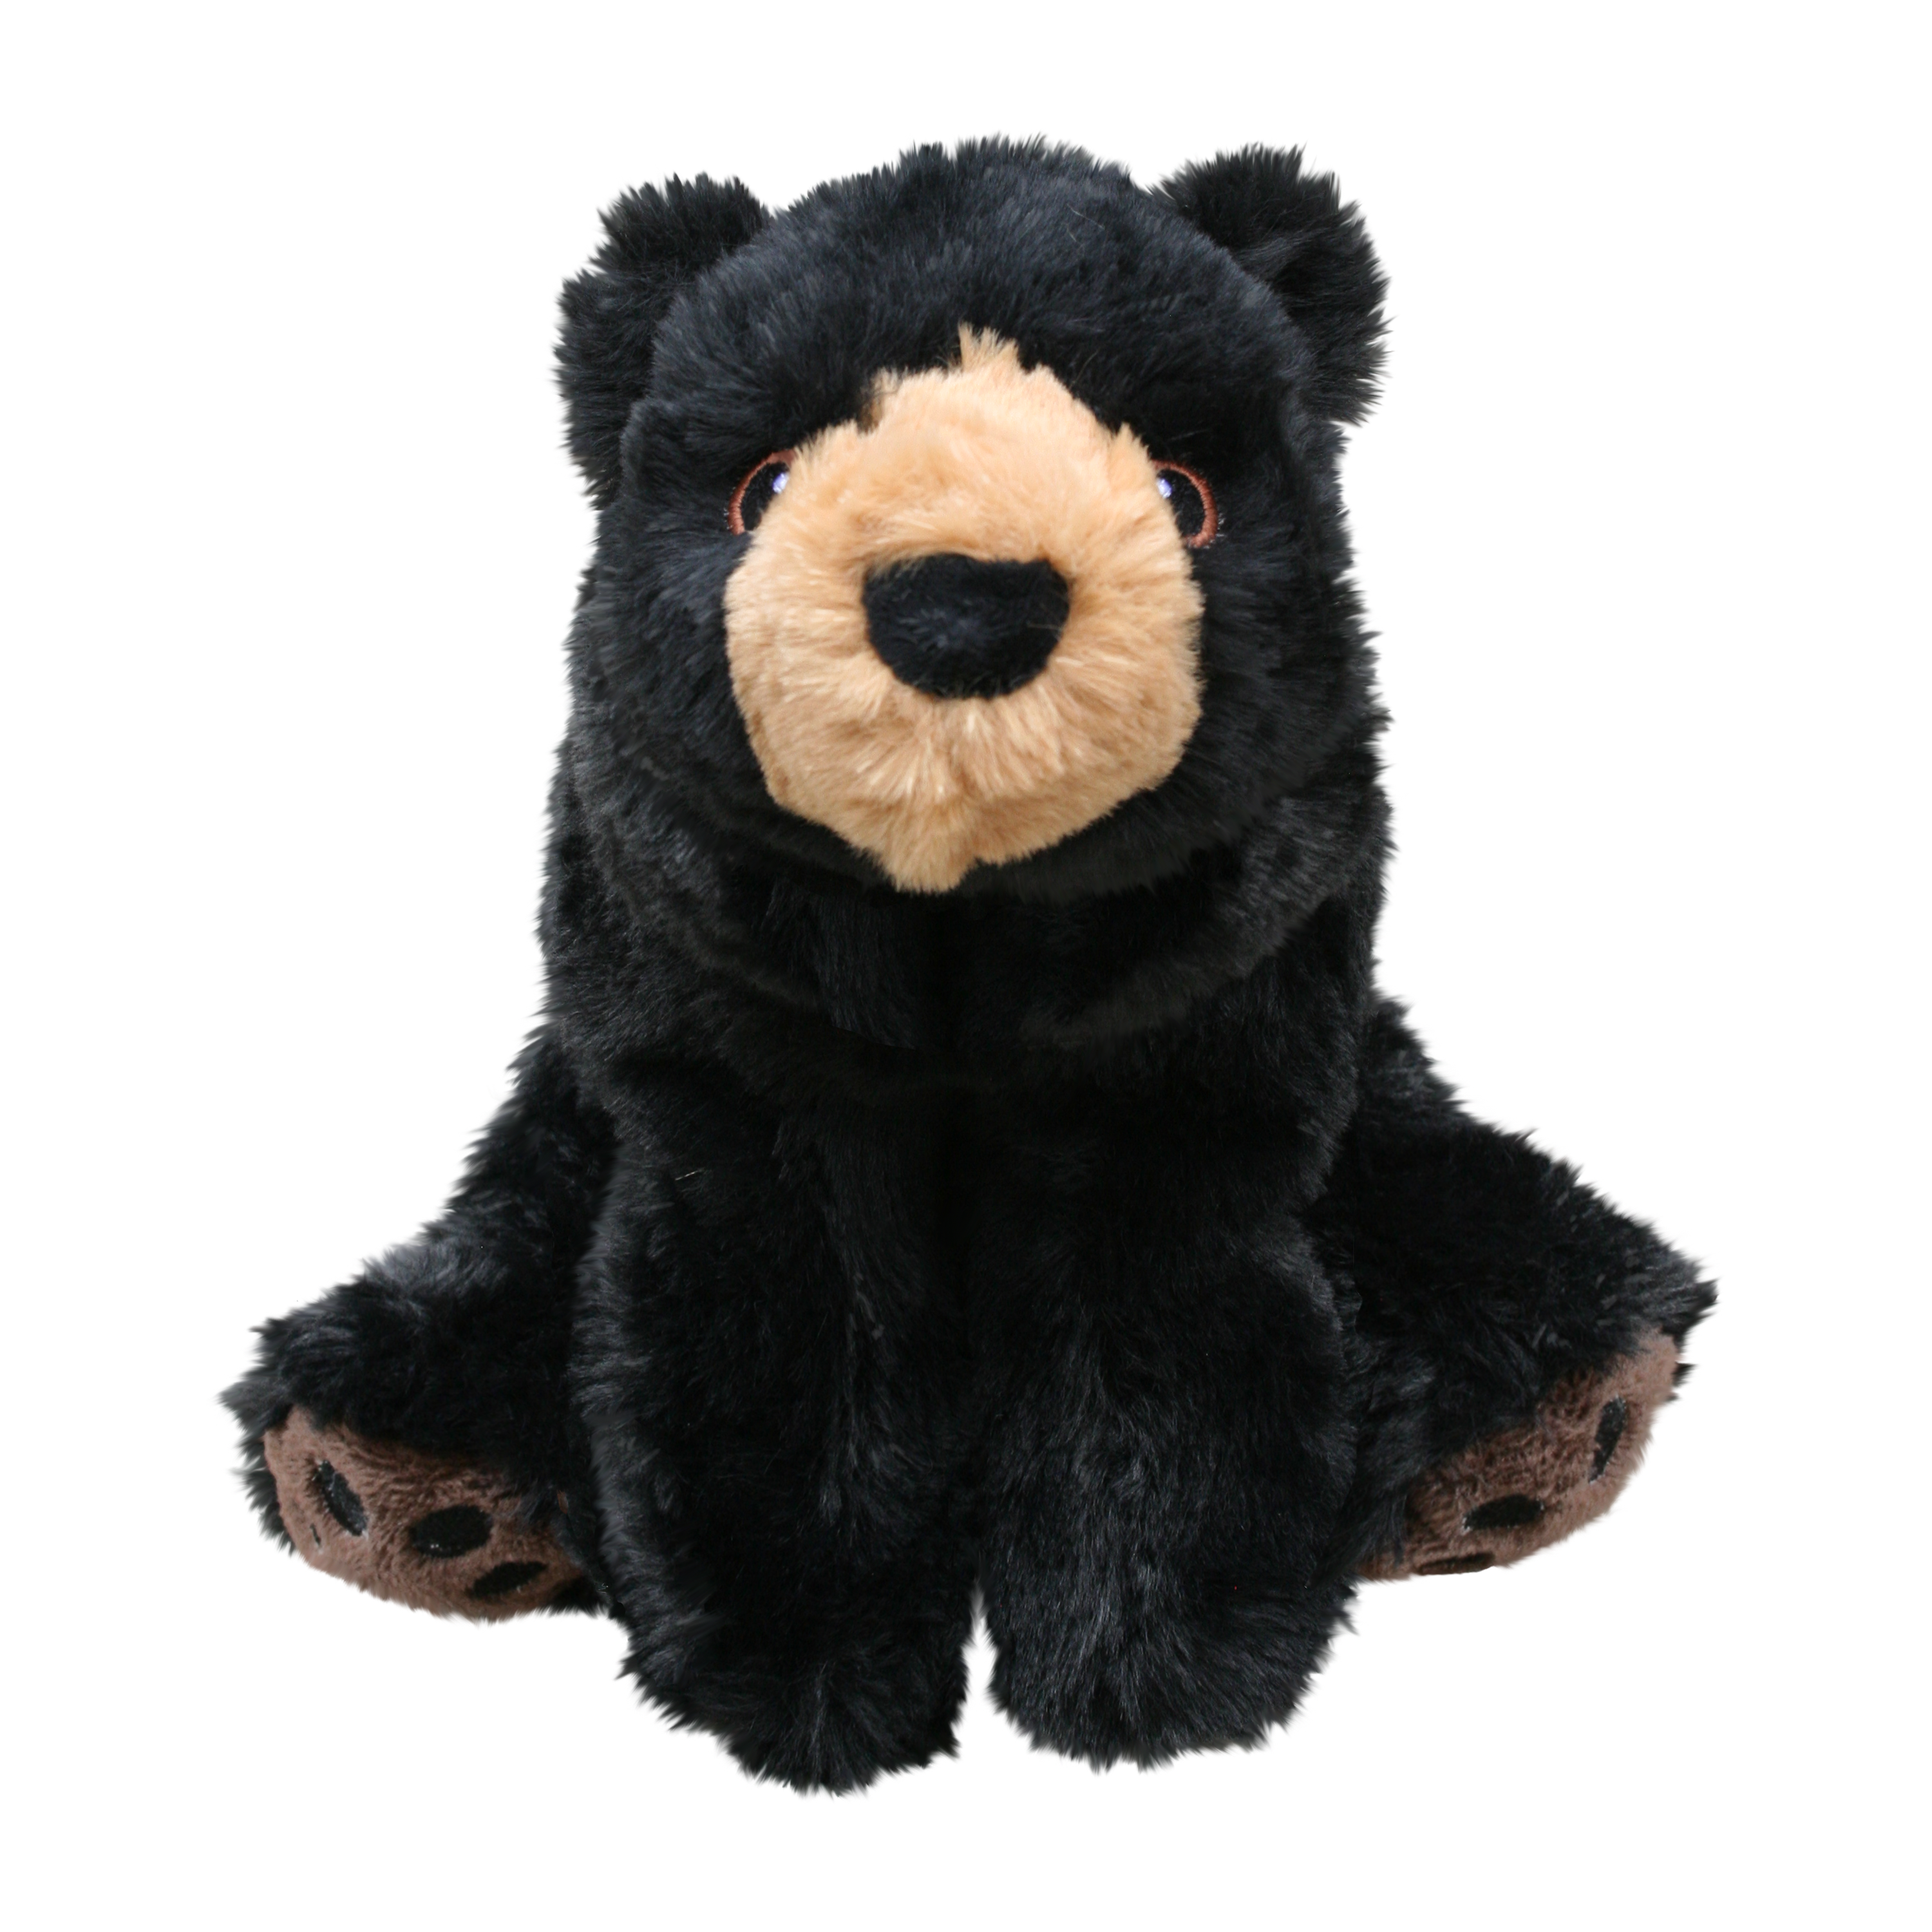 Comfort Kiddos Bear offpack product image